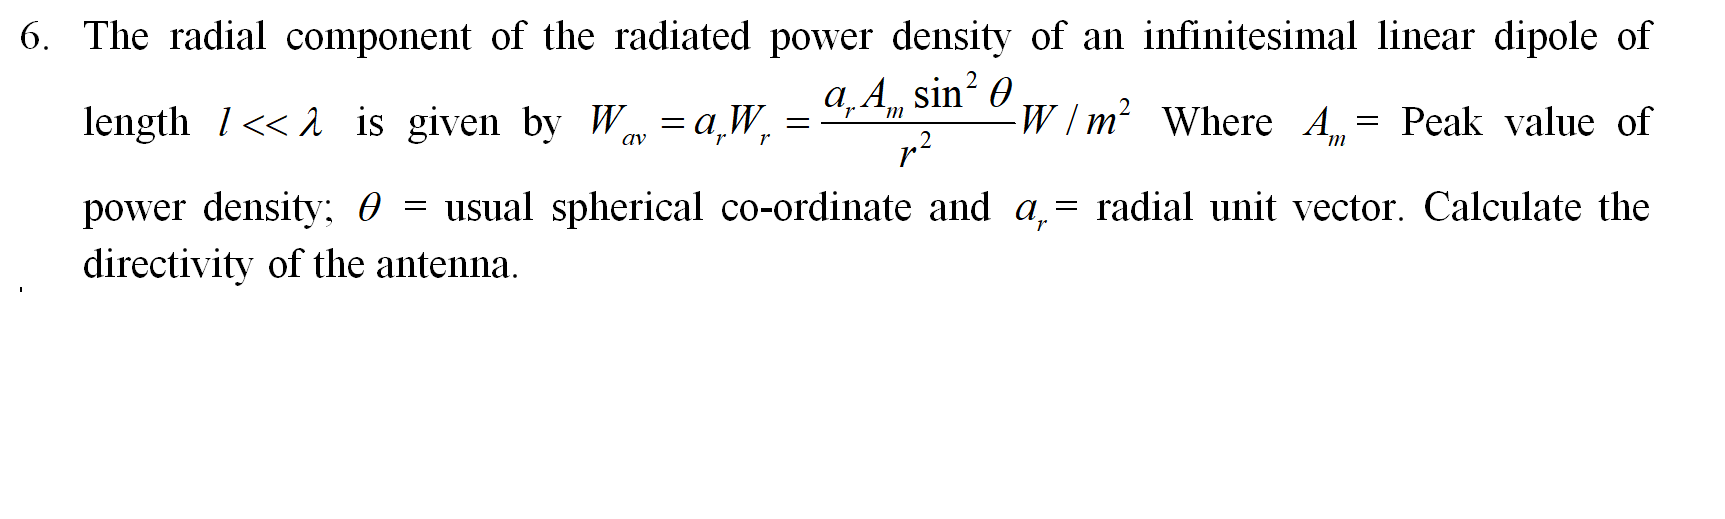 The radial component of the radiated power density of an infinitesimal linear dipole of
length 1<< 2 is given by Wav = a,W,
a,A, sin? 0
W/m² Where A = Peak value of
power density; 0 = usual spherical co-ordinate and a,= radial unit vector. Calculate the
directivity of the antenna.
